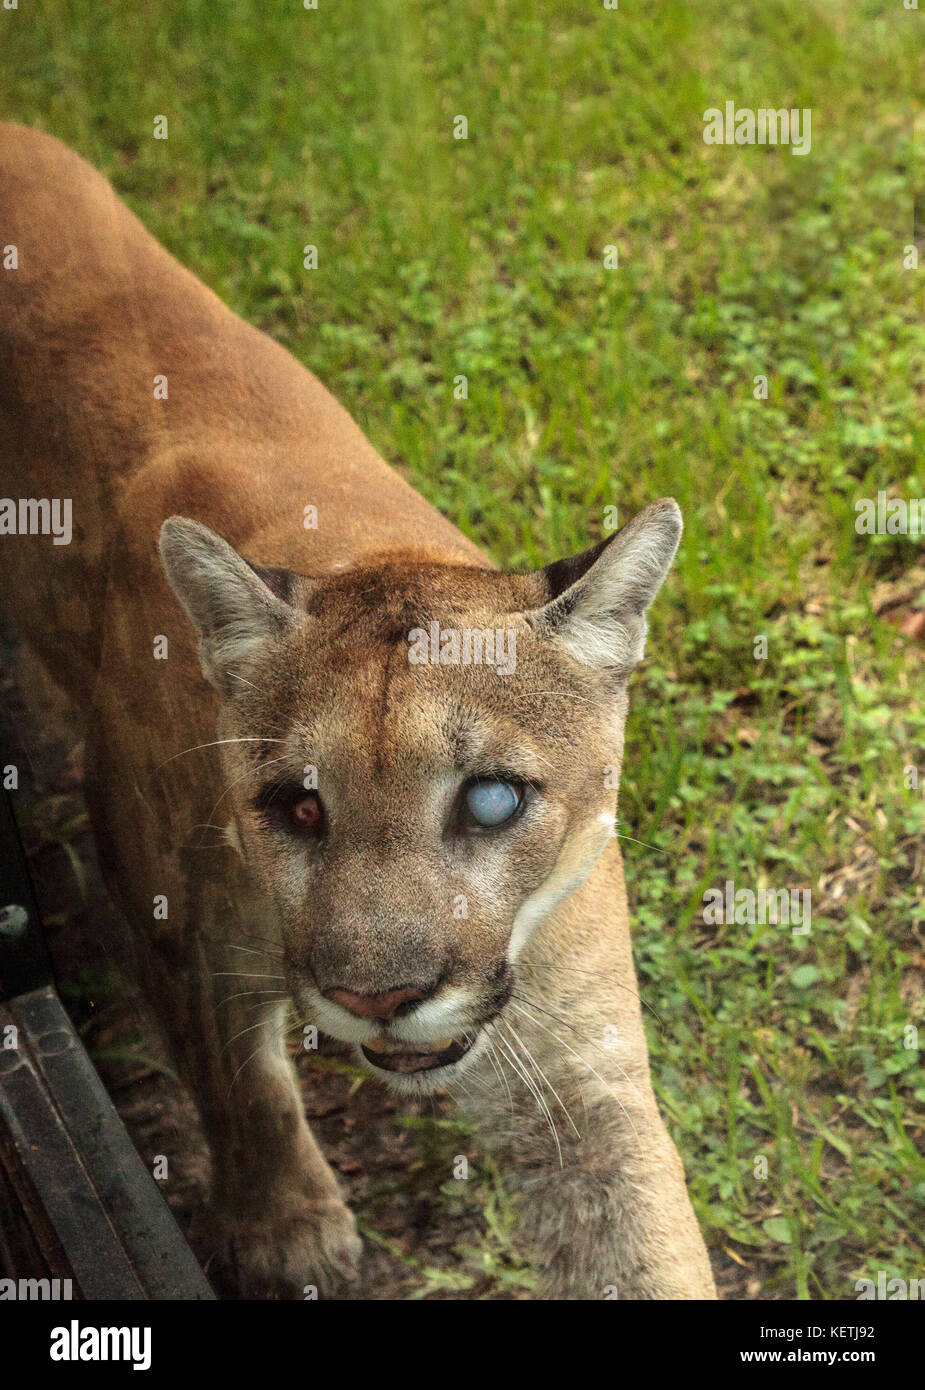 How did a puma and a panther end up in an Għajnsielem home?